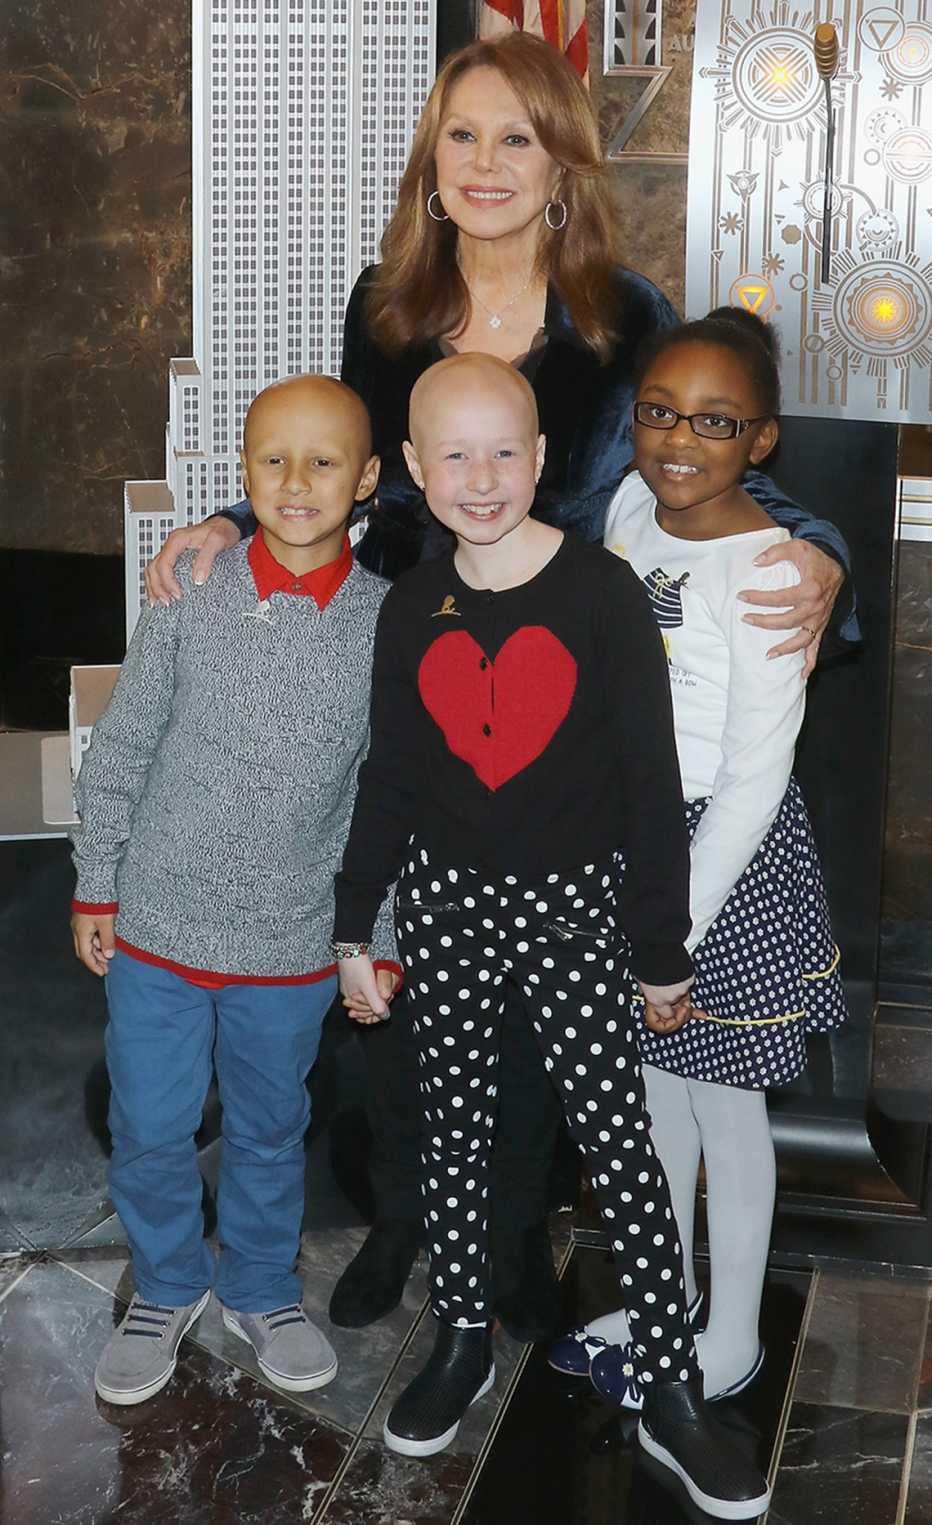 Marlo Thomas with children from St. Jude Children’s Research Hospital.